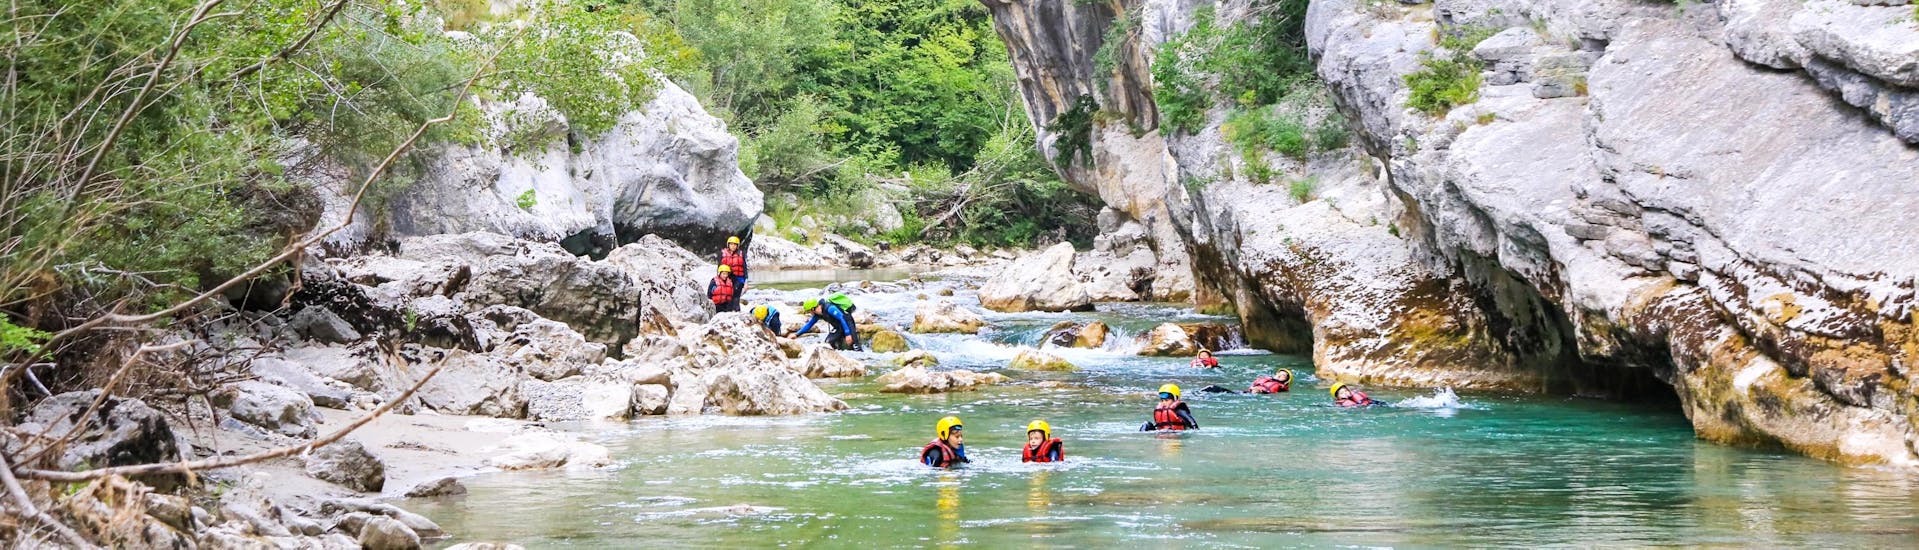 Group during River Trekking at Pont de Tusset in Verdon for Families with Yeti Rafting Verdon.